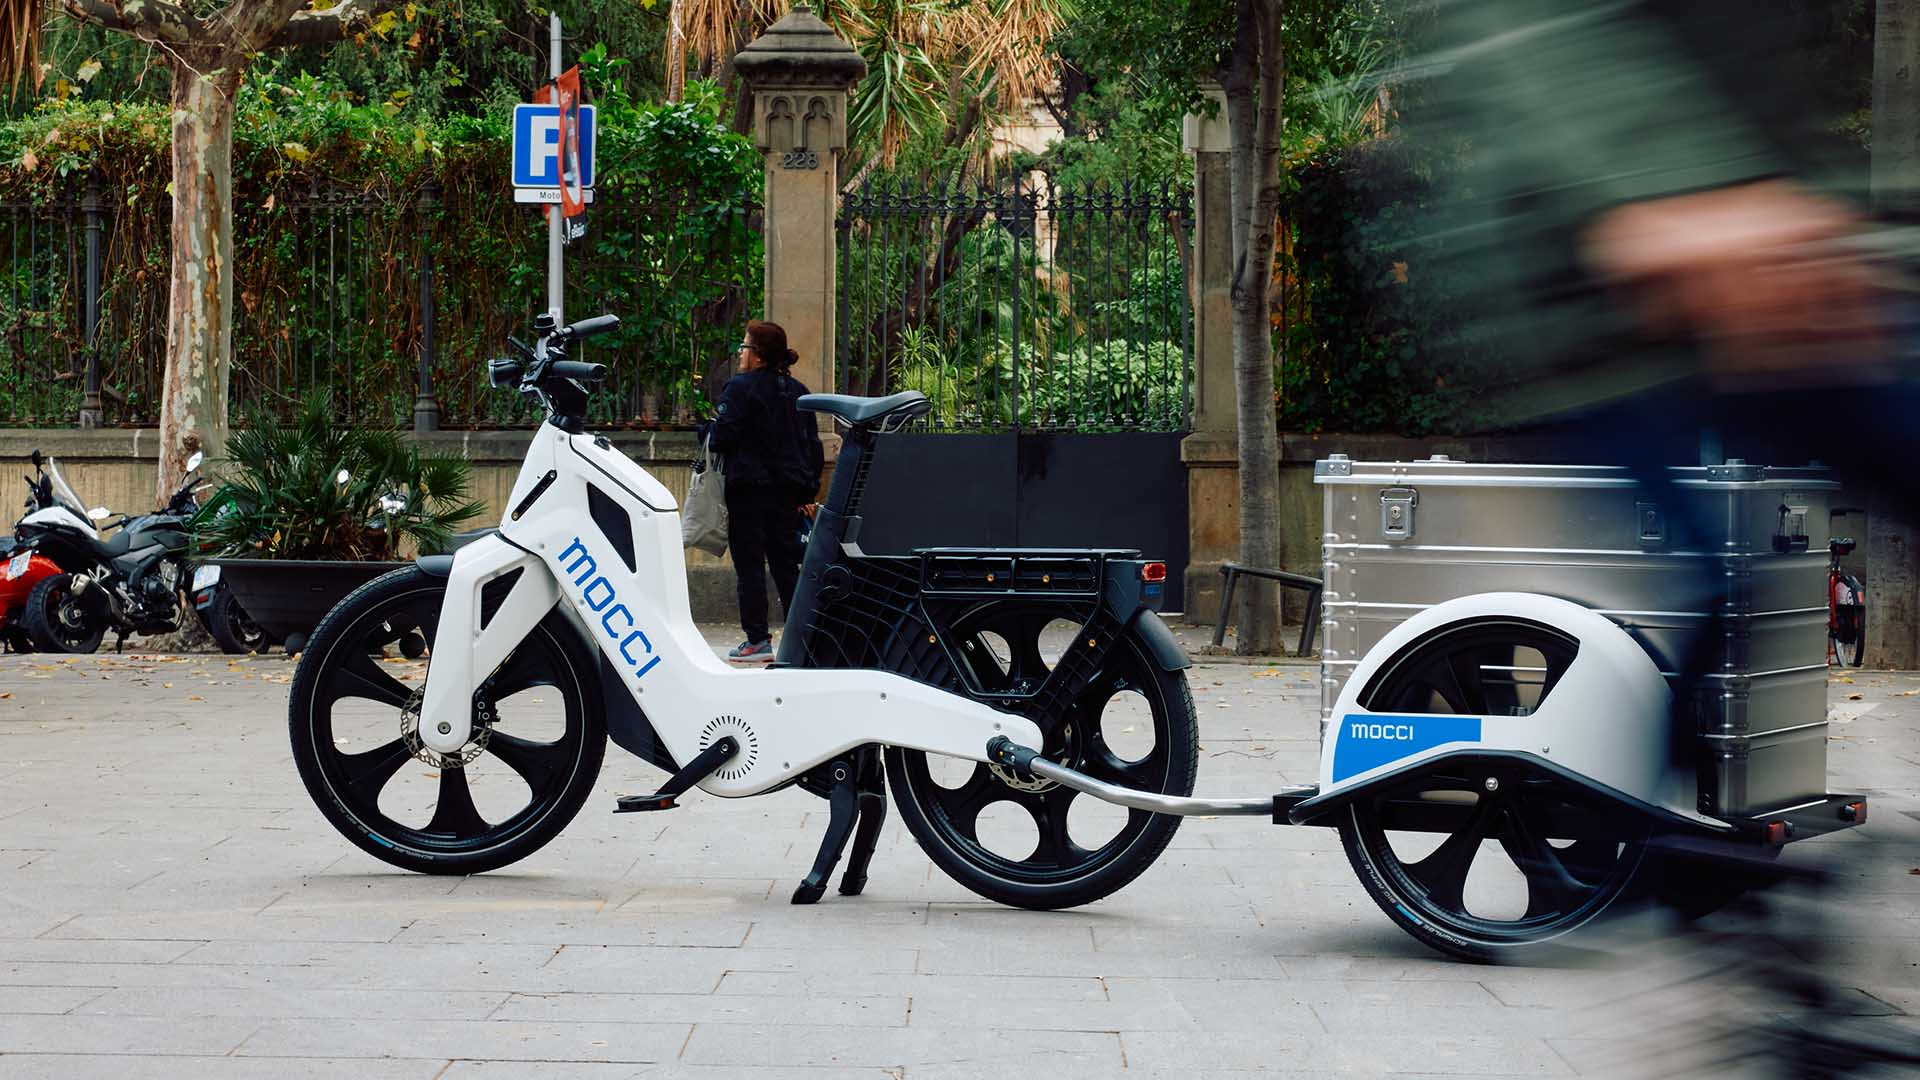 The e-bike mocci is parked in front of a park area.